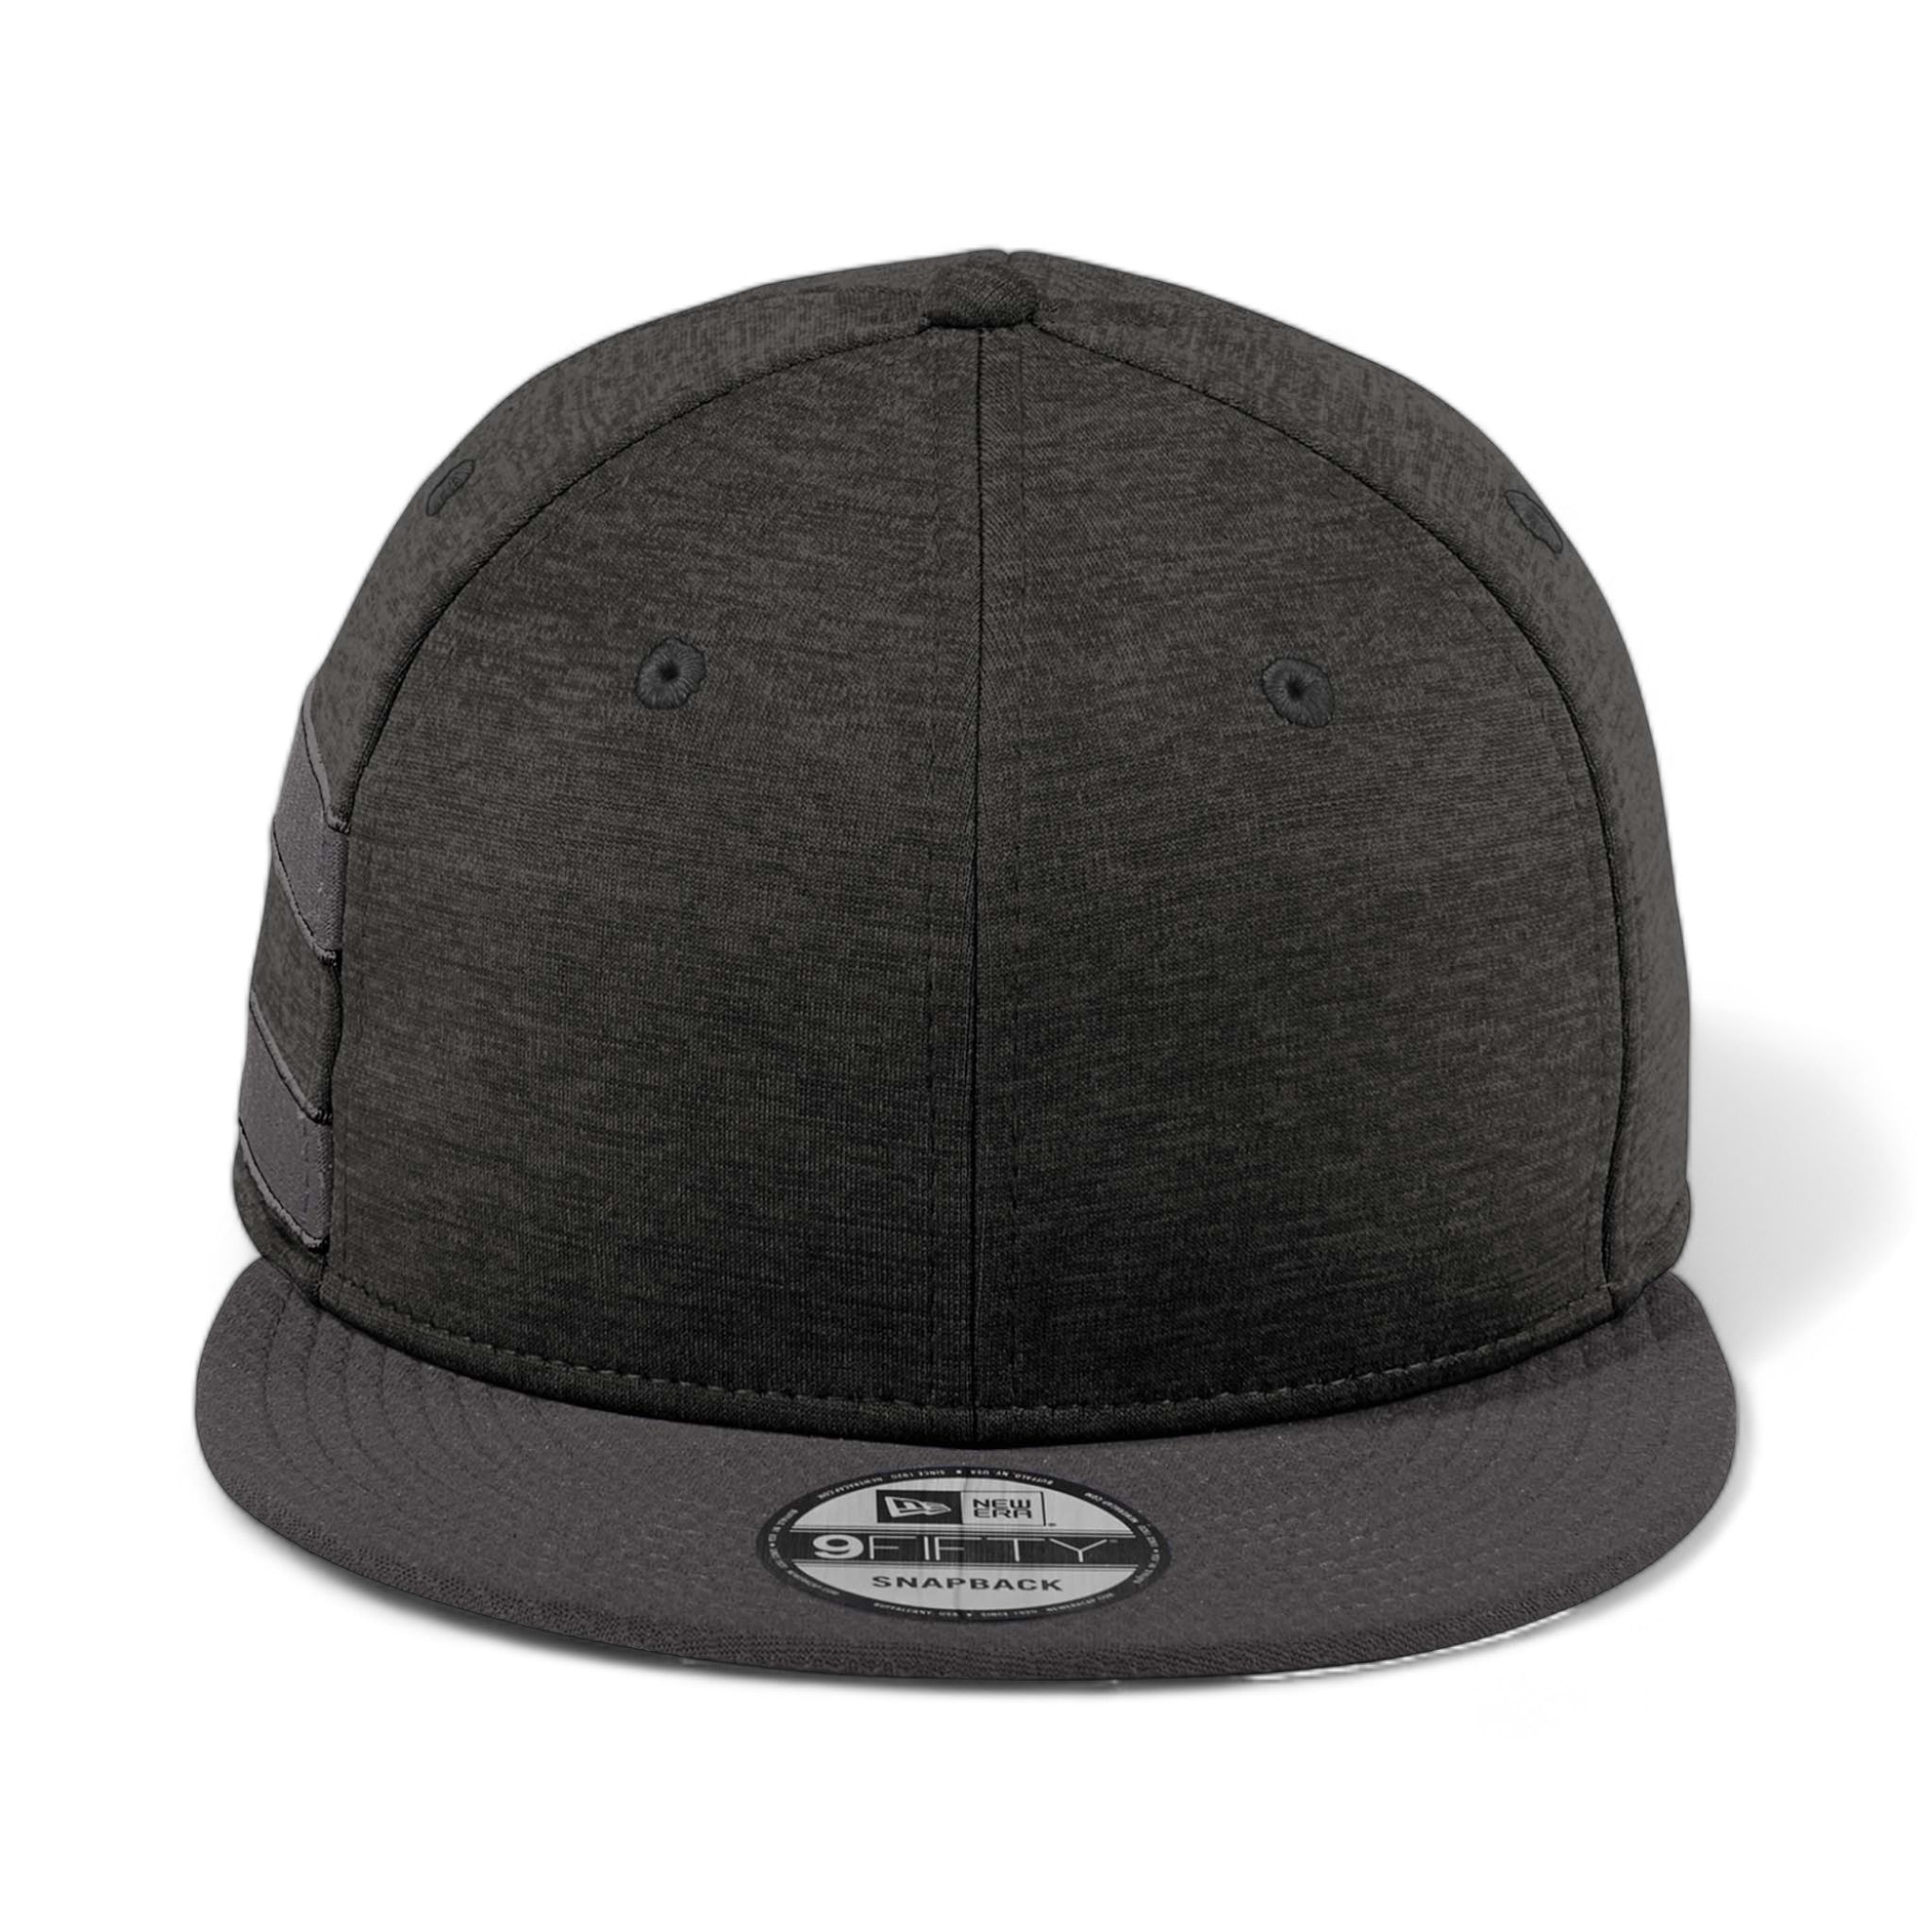 Front view of New Era NE408 custom hat in black shadow heather and graphite